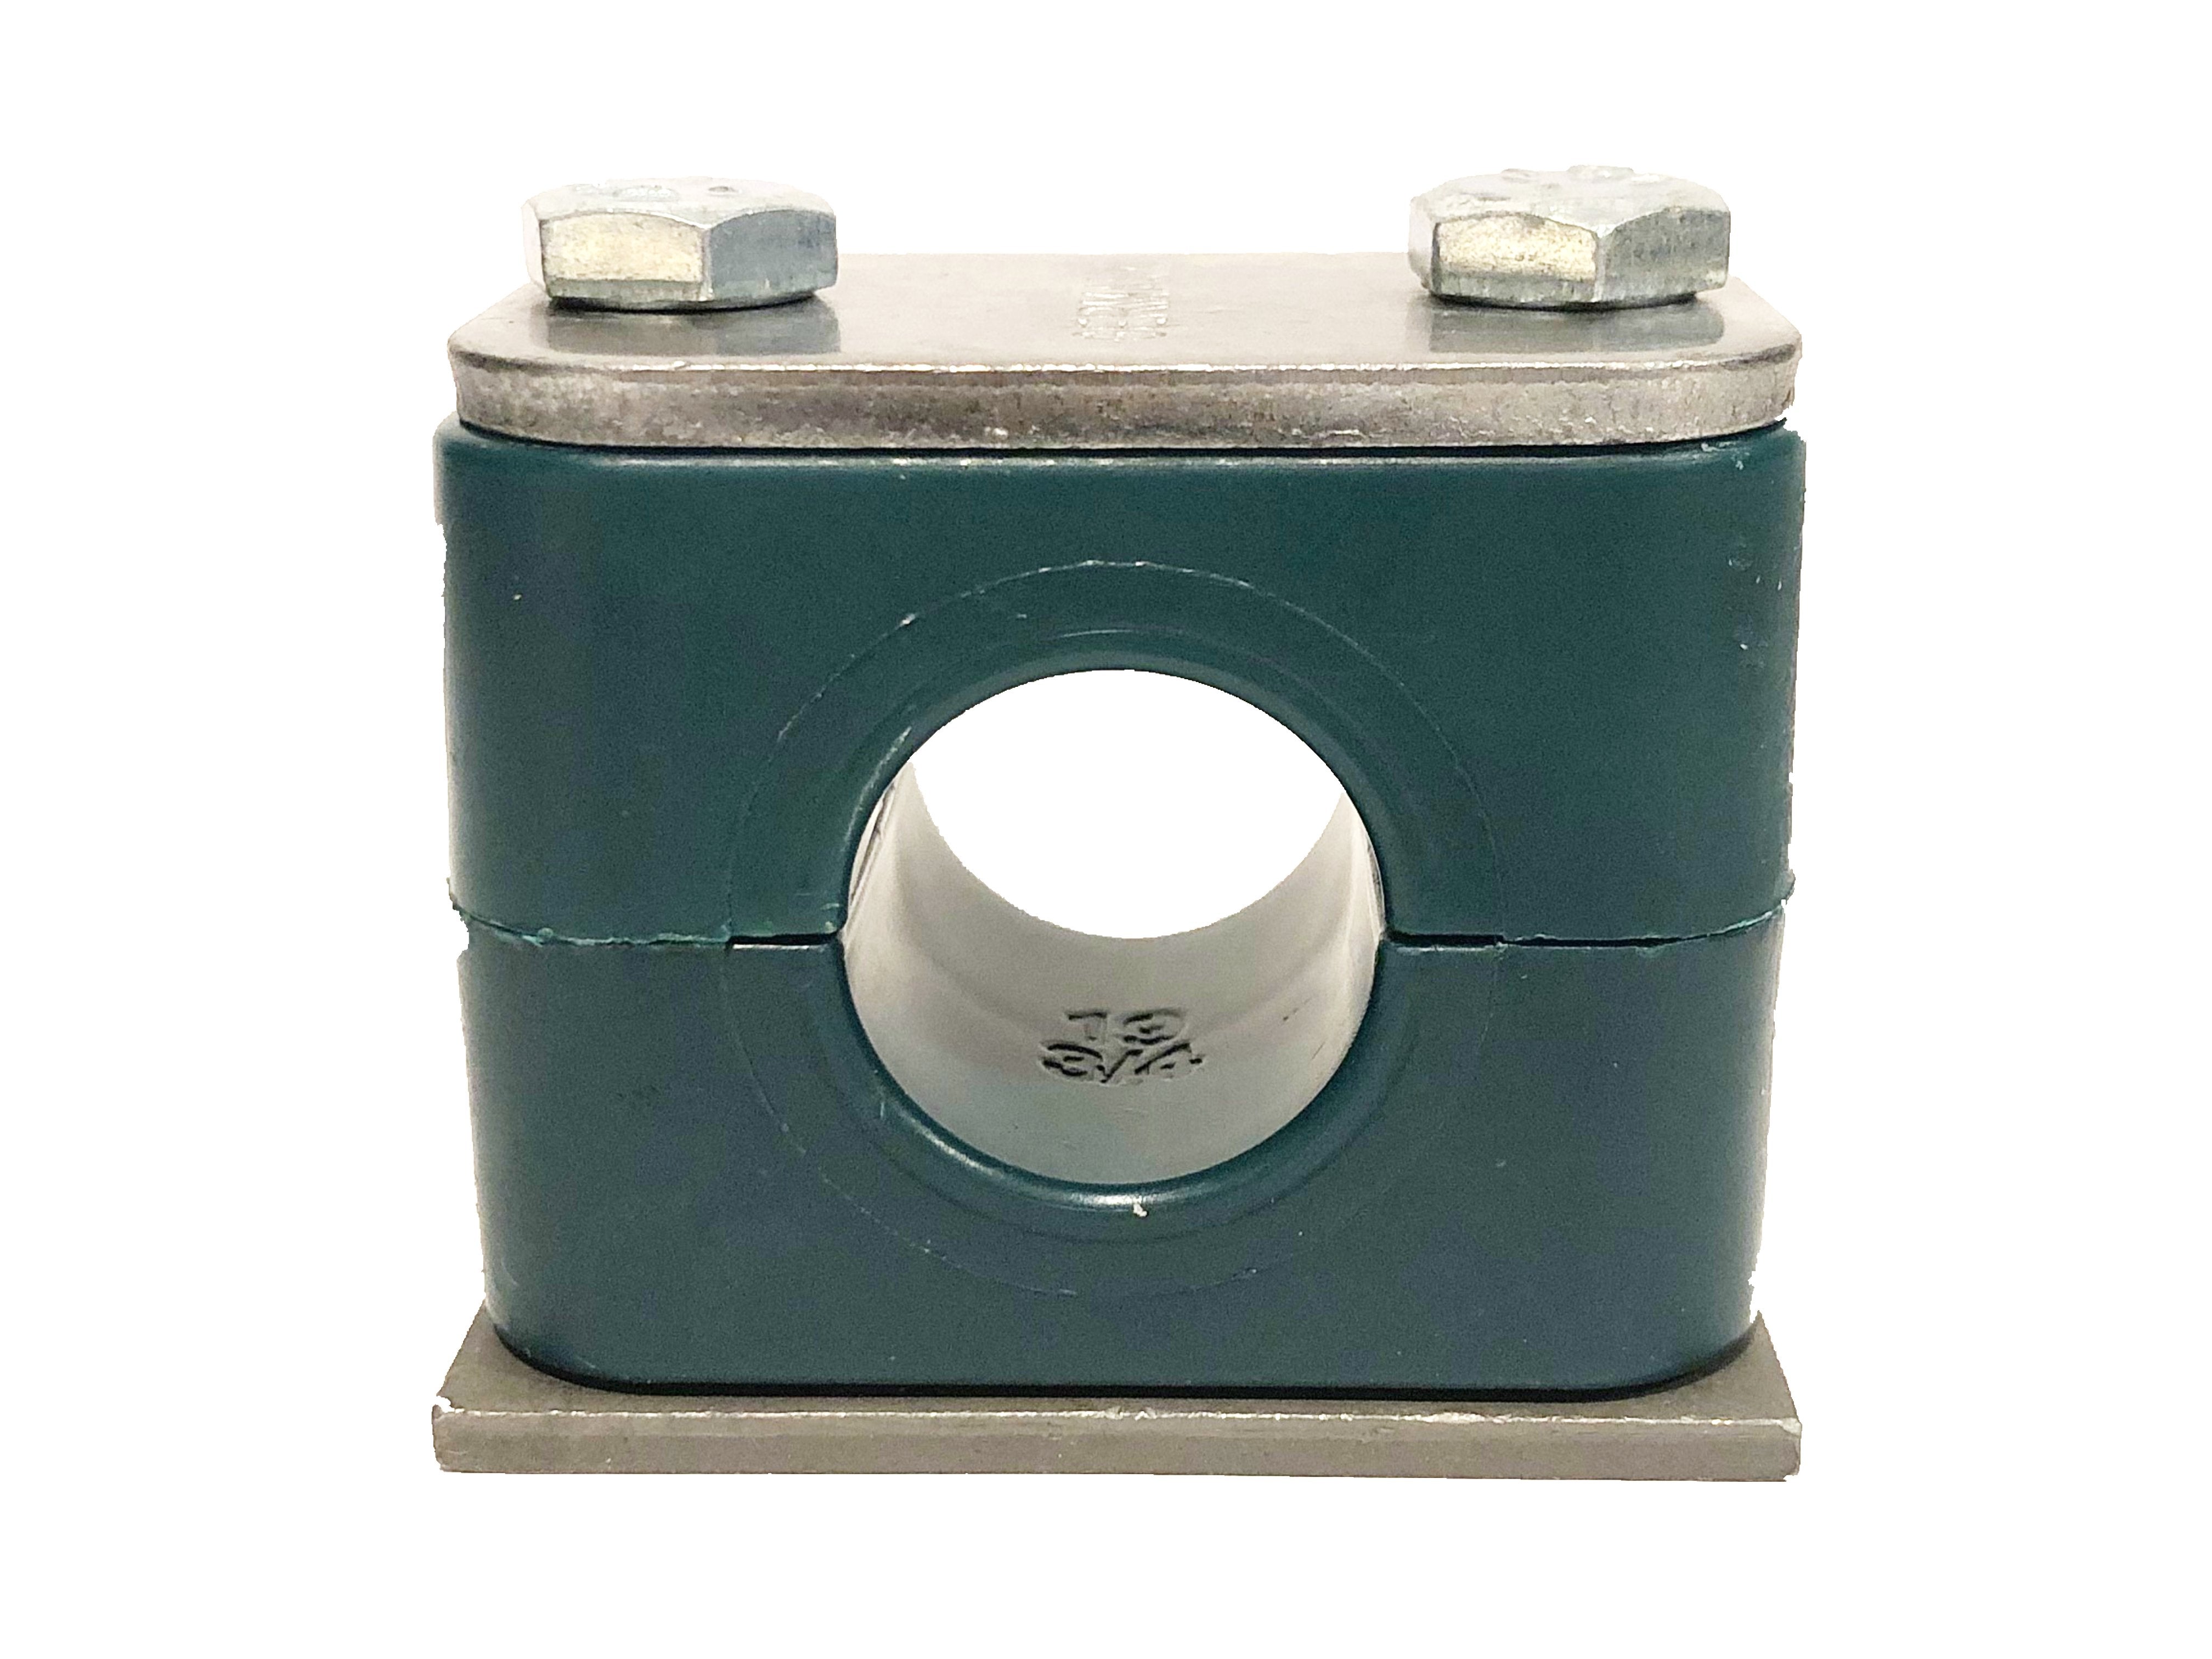 SP-888.9-PP-H-DP-AS-U-W10 : Stauff Clamp, Single Weld Plate, 3.5" (88.9mm) OD, for 3" Pipe, Green PP Insert, Smooth Interior, Carbon Steel